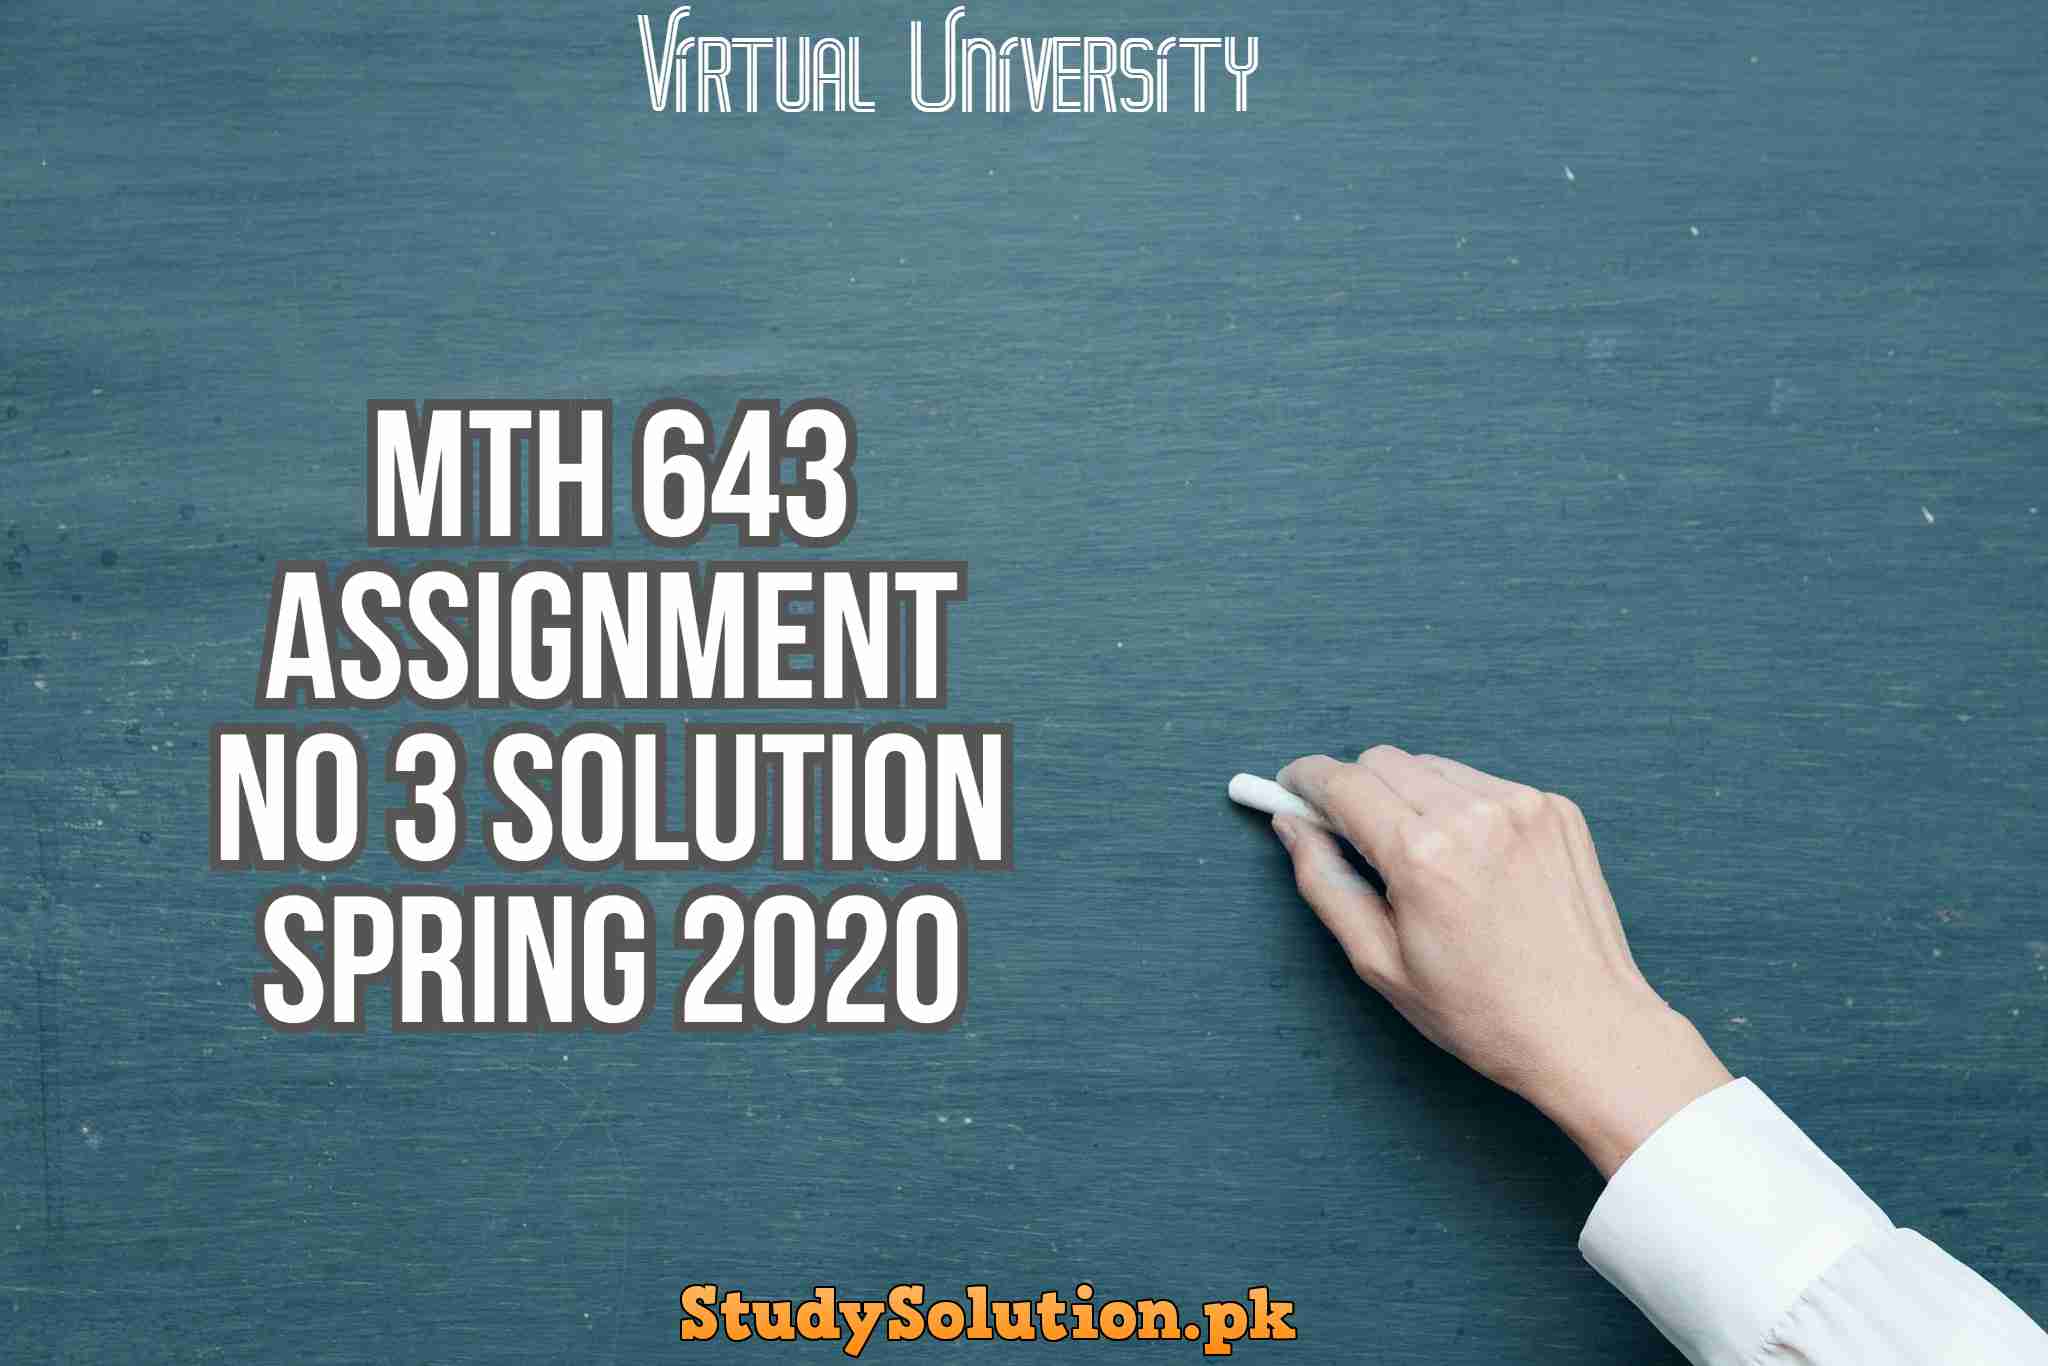 MTH 643 Assignment No 3 Solution Spring 2020